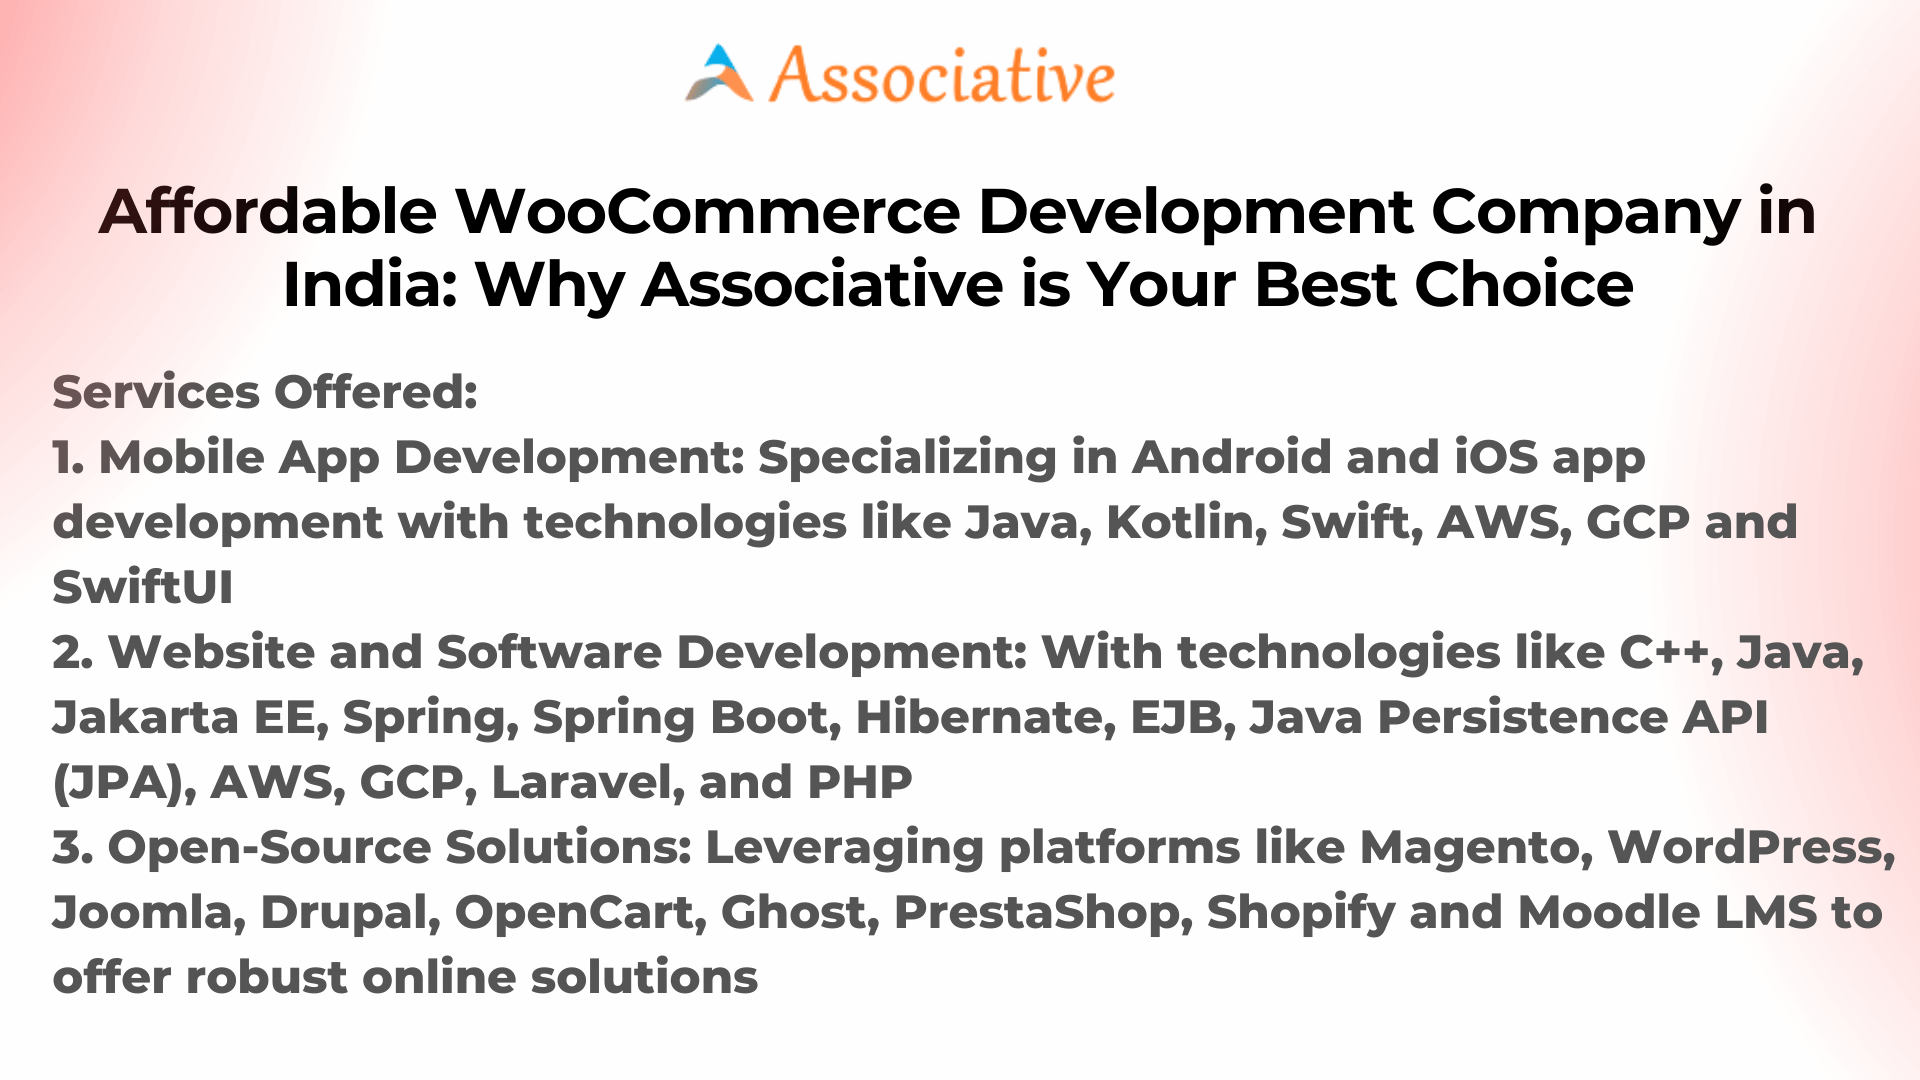 Affordable WooCommerce Development Company in India Why Associative is Your Best Choice